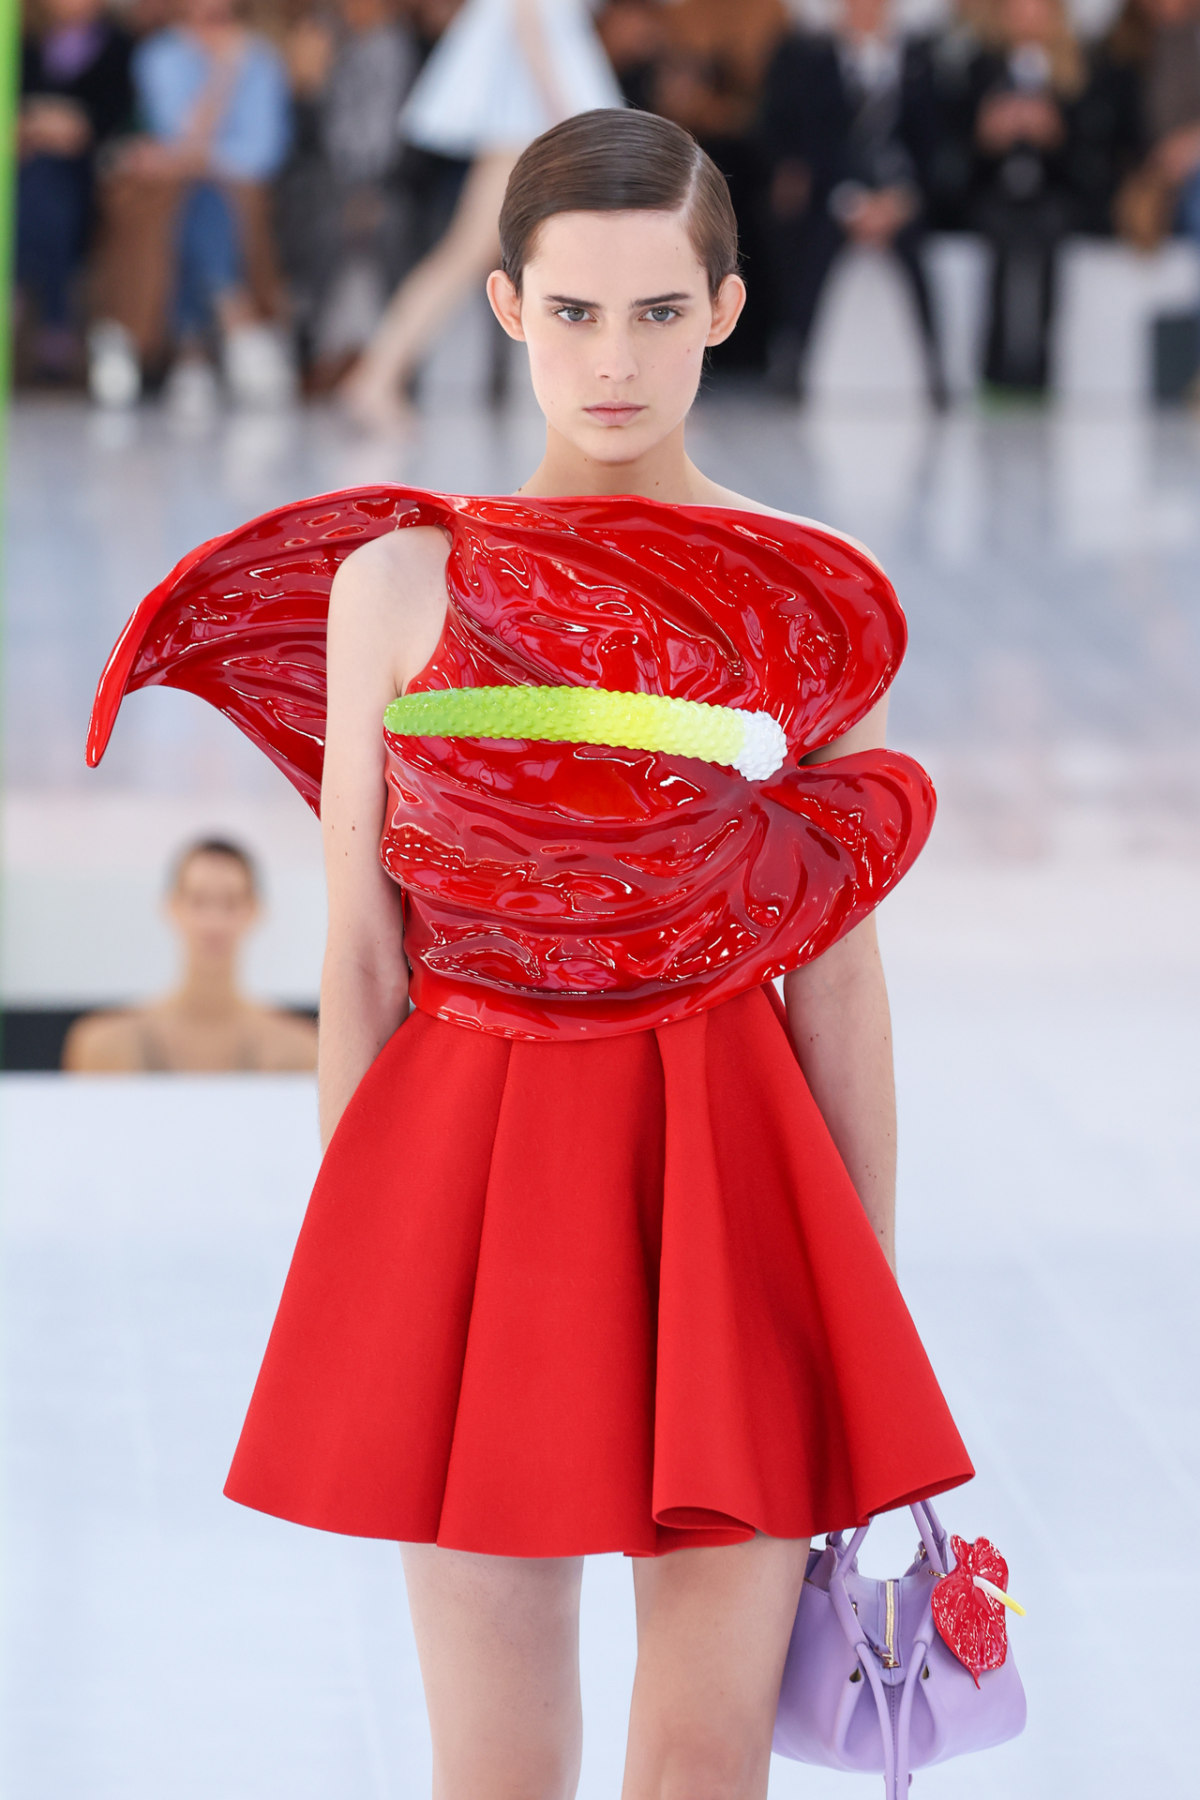 Spanish luxury fashion house Balenciaga blurs real with Unreal in